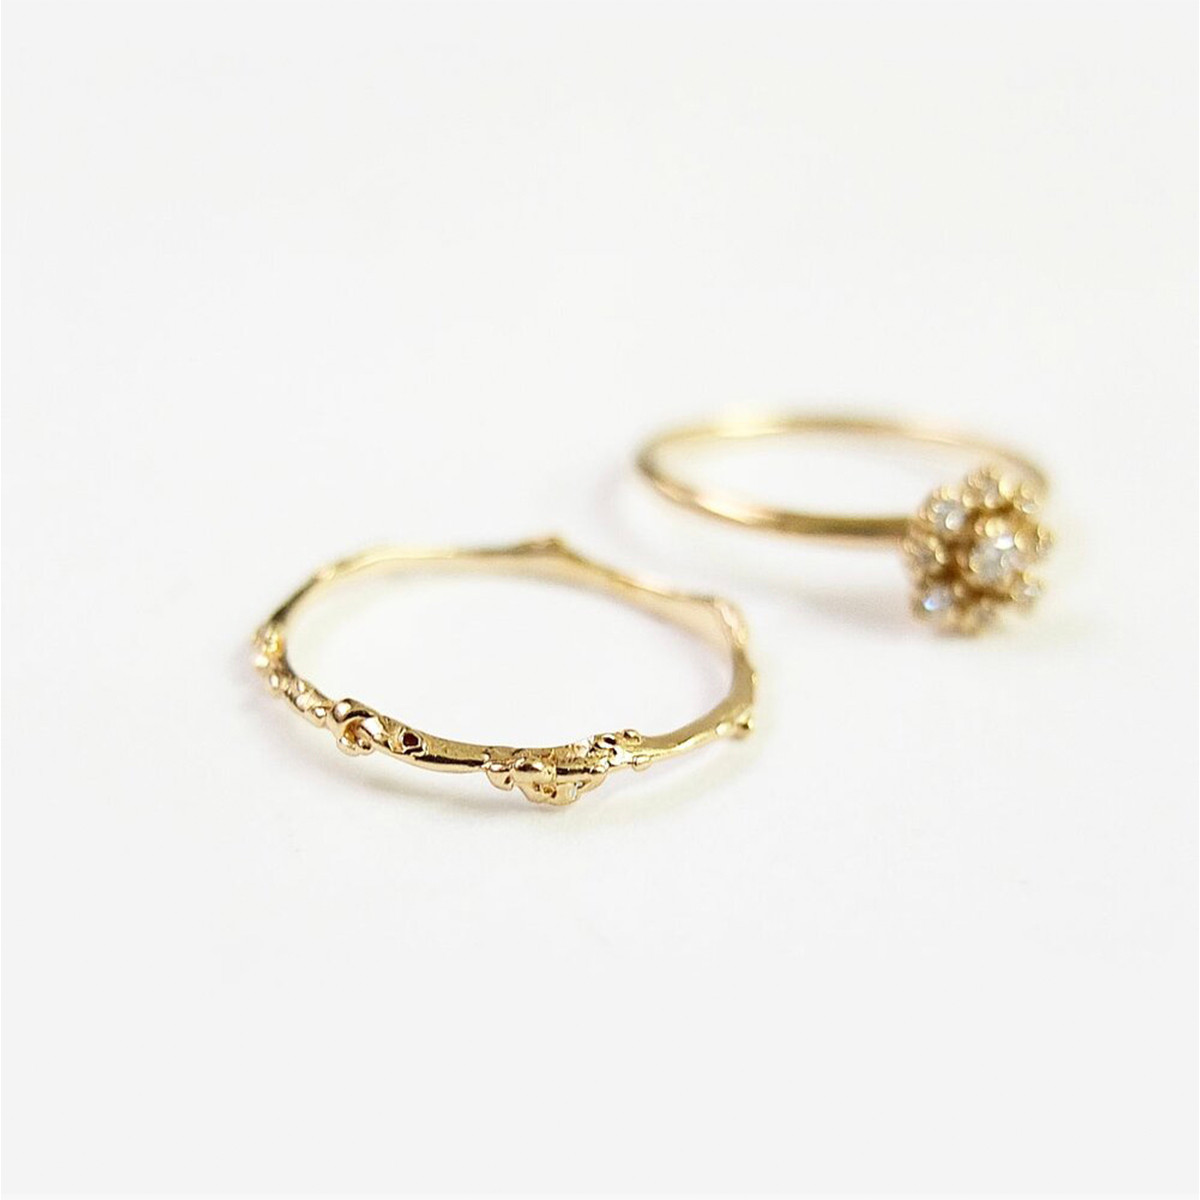 Branch Ring by N+A New York, Noriko and Akiko Sugawara available to buy online at tomfoolery london